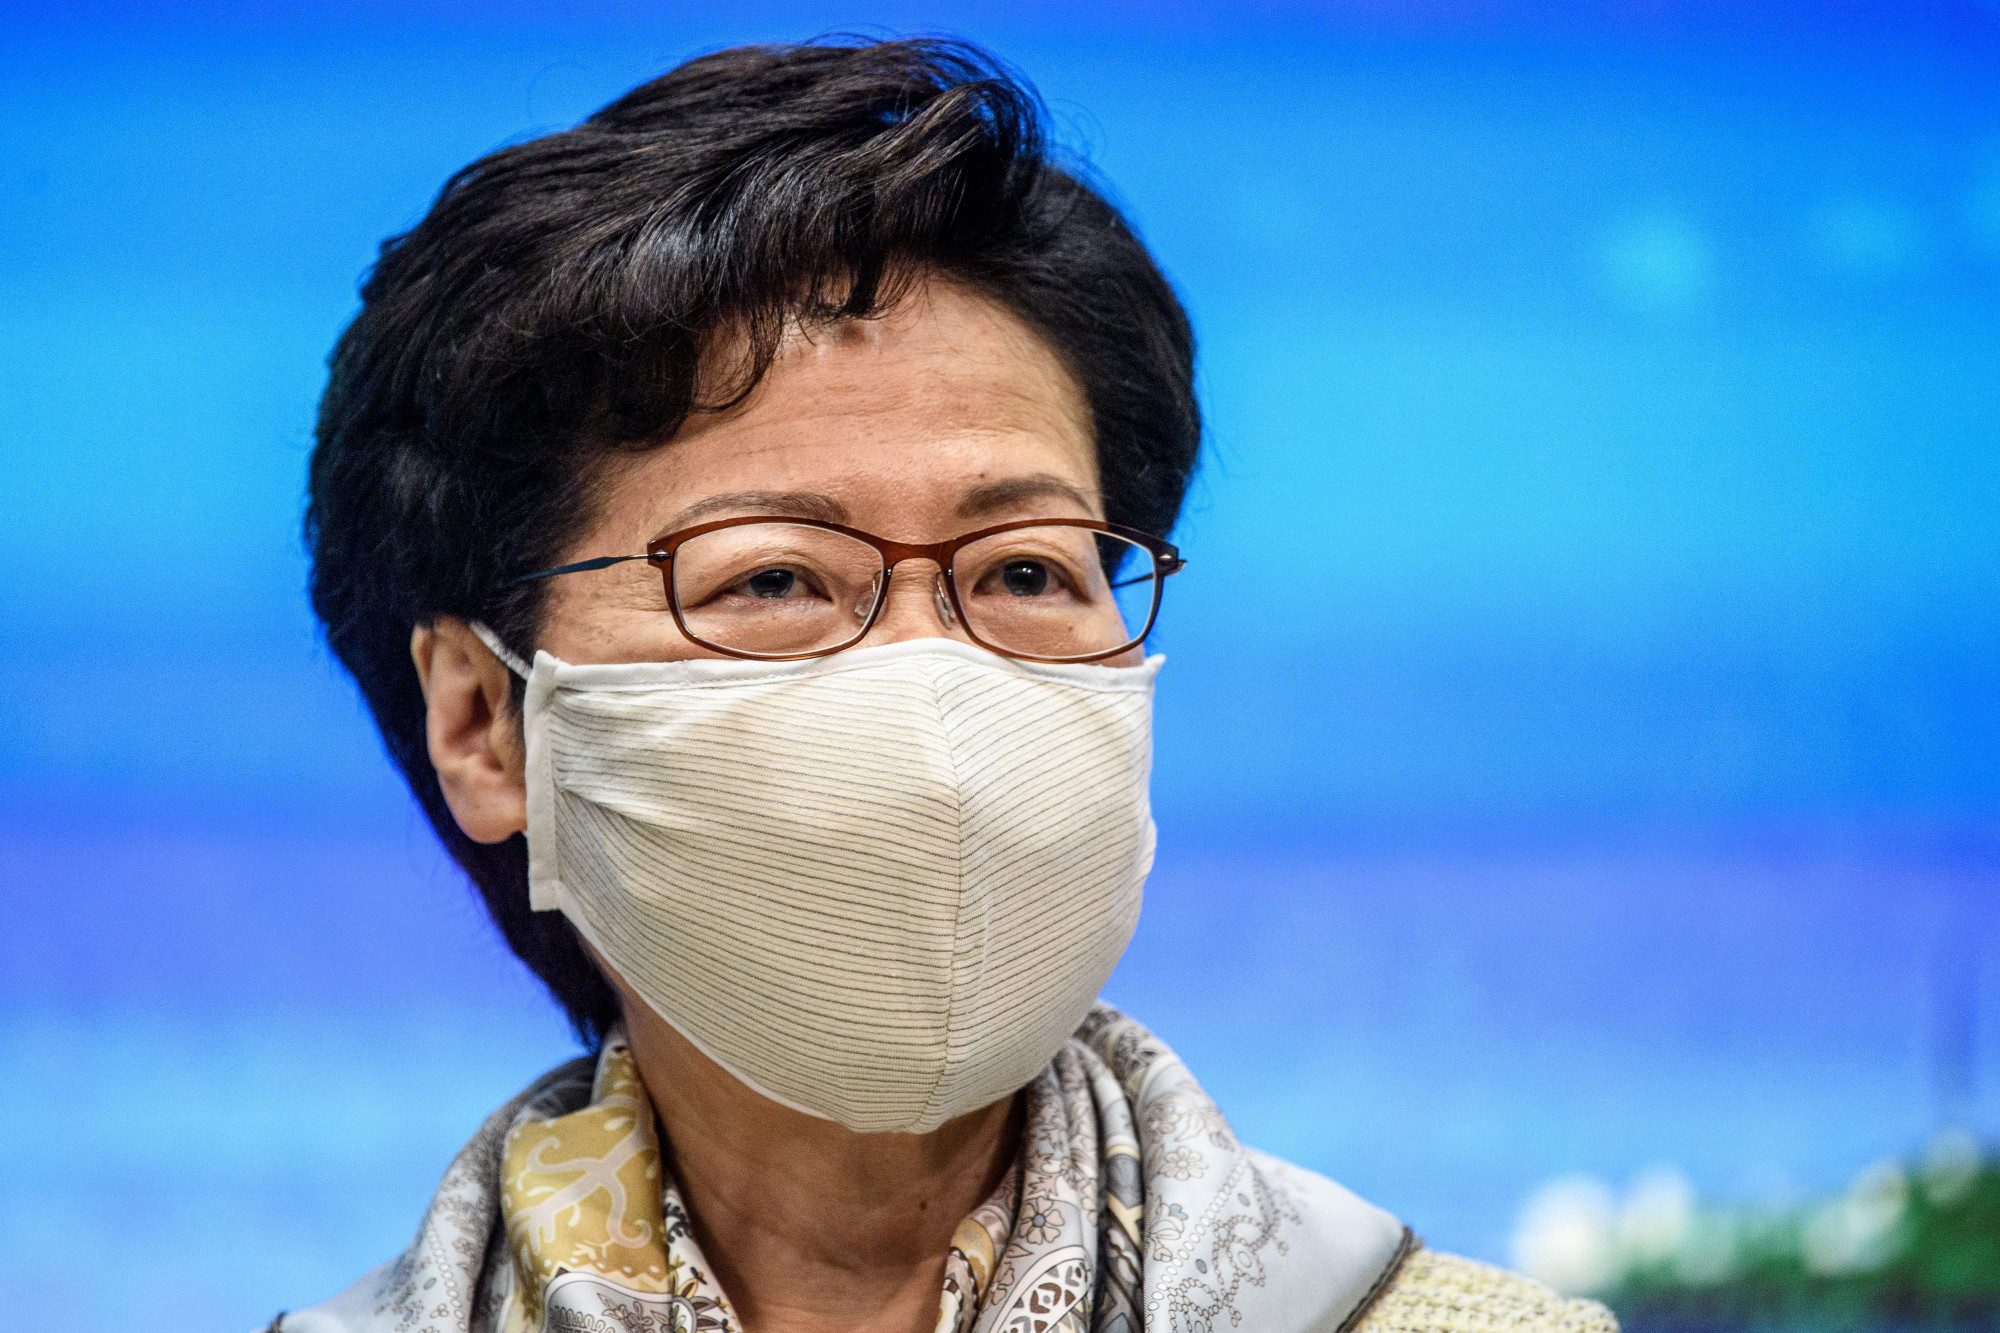 Hong Kong’s Carrie Lam Silent as Beijing Passes Draconian National Security Law